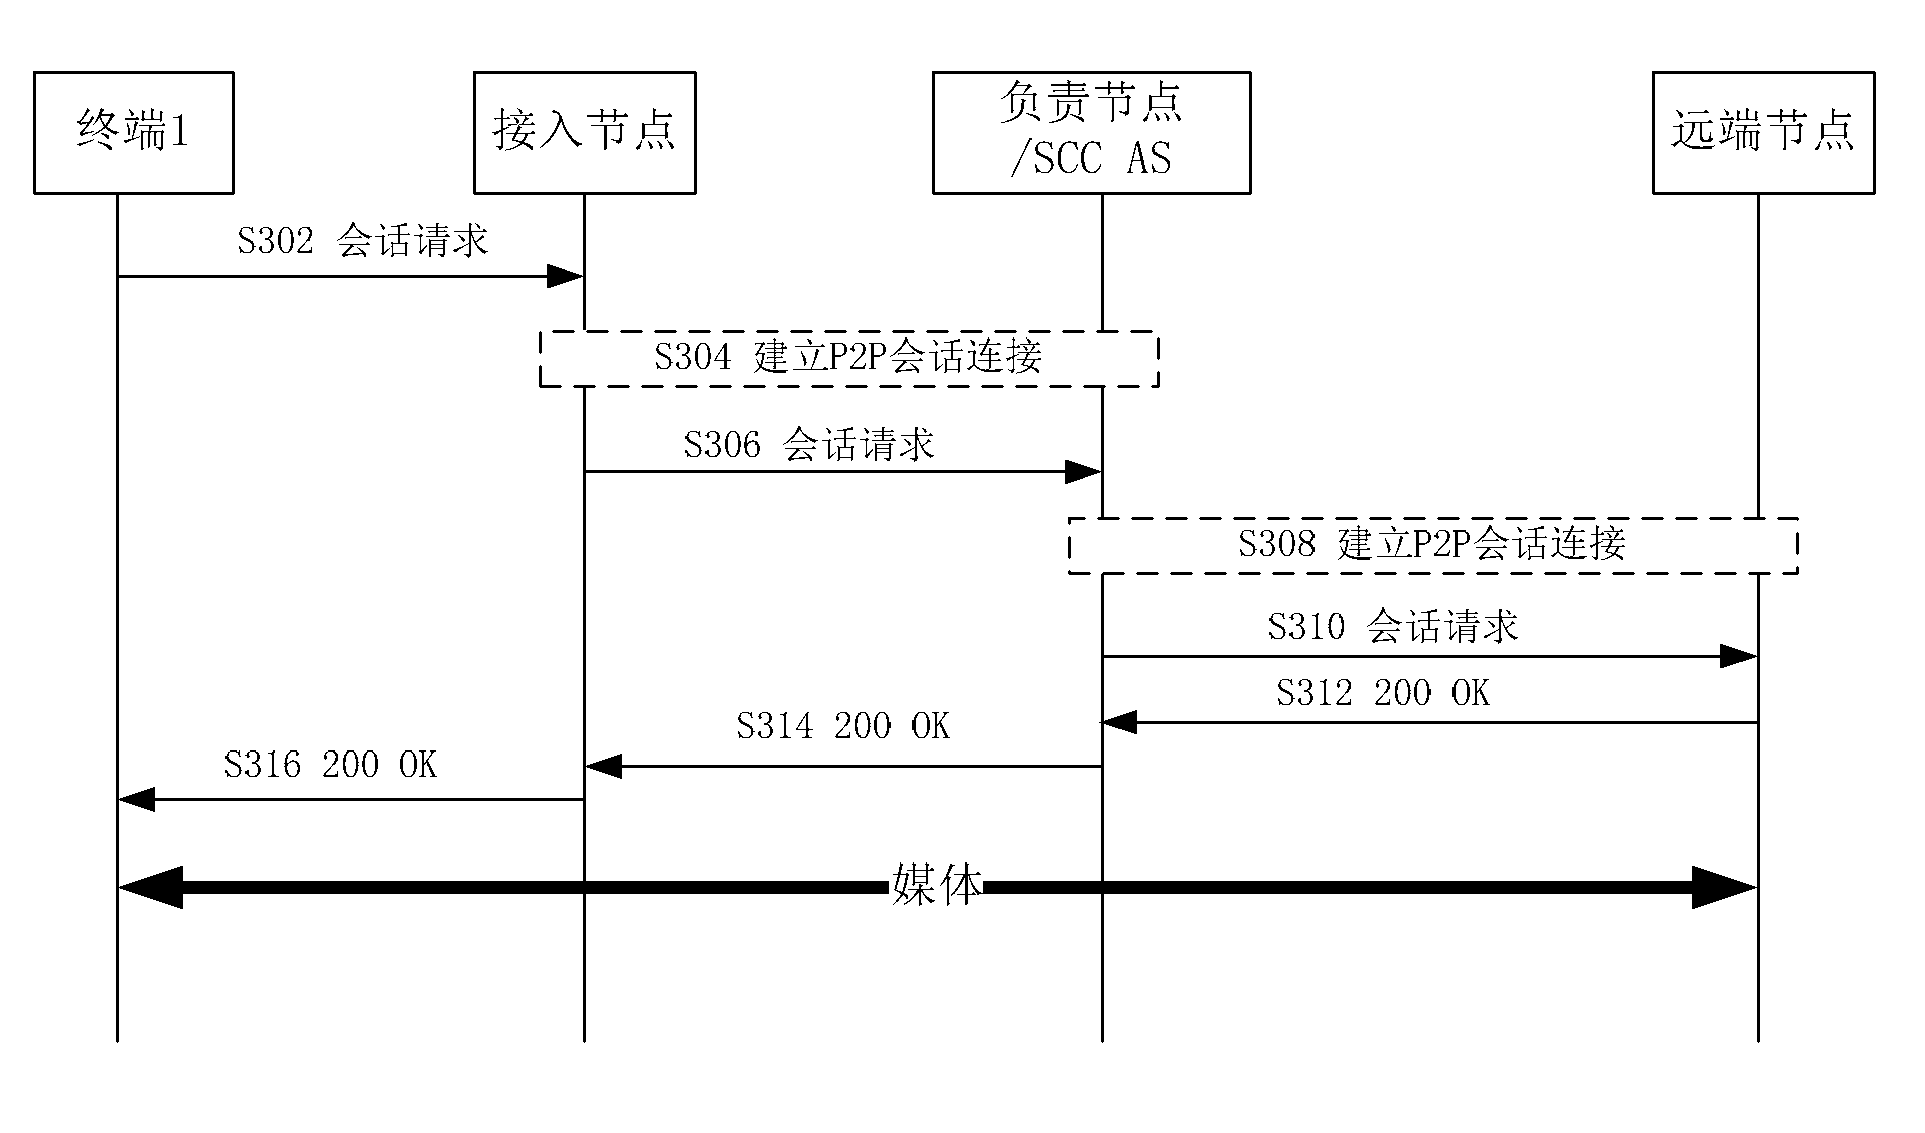 A method and an apparatus for establishing a session